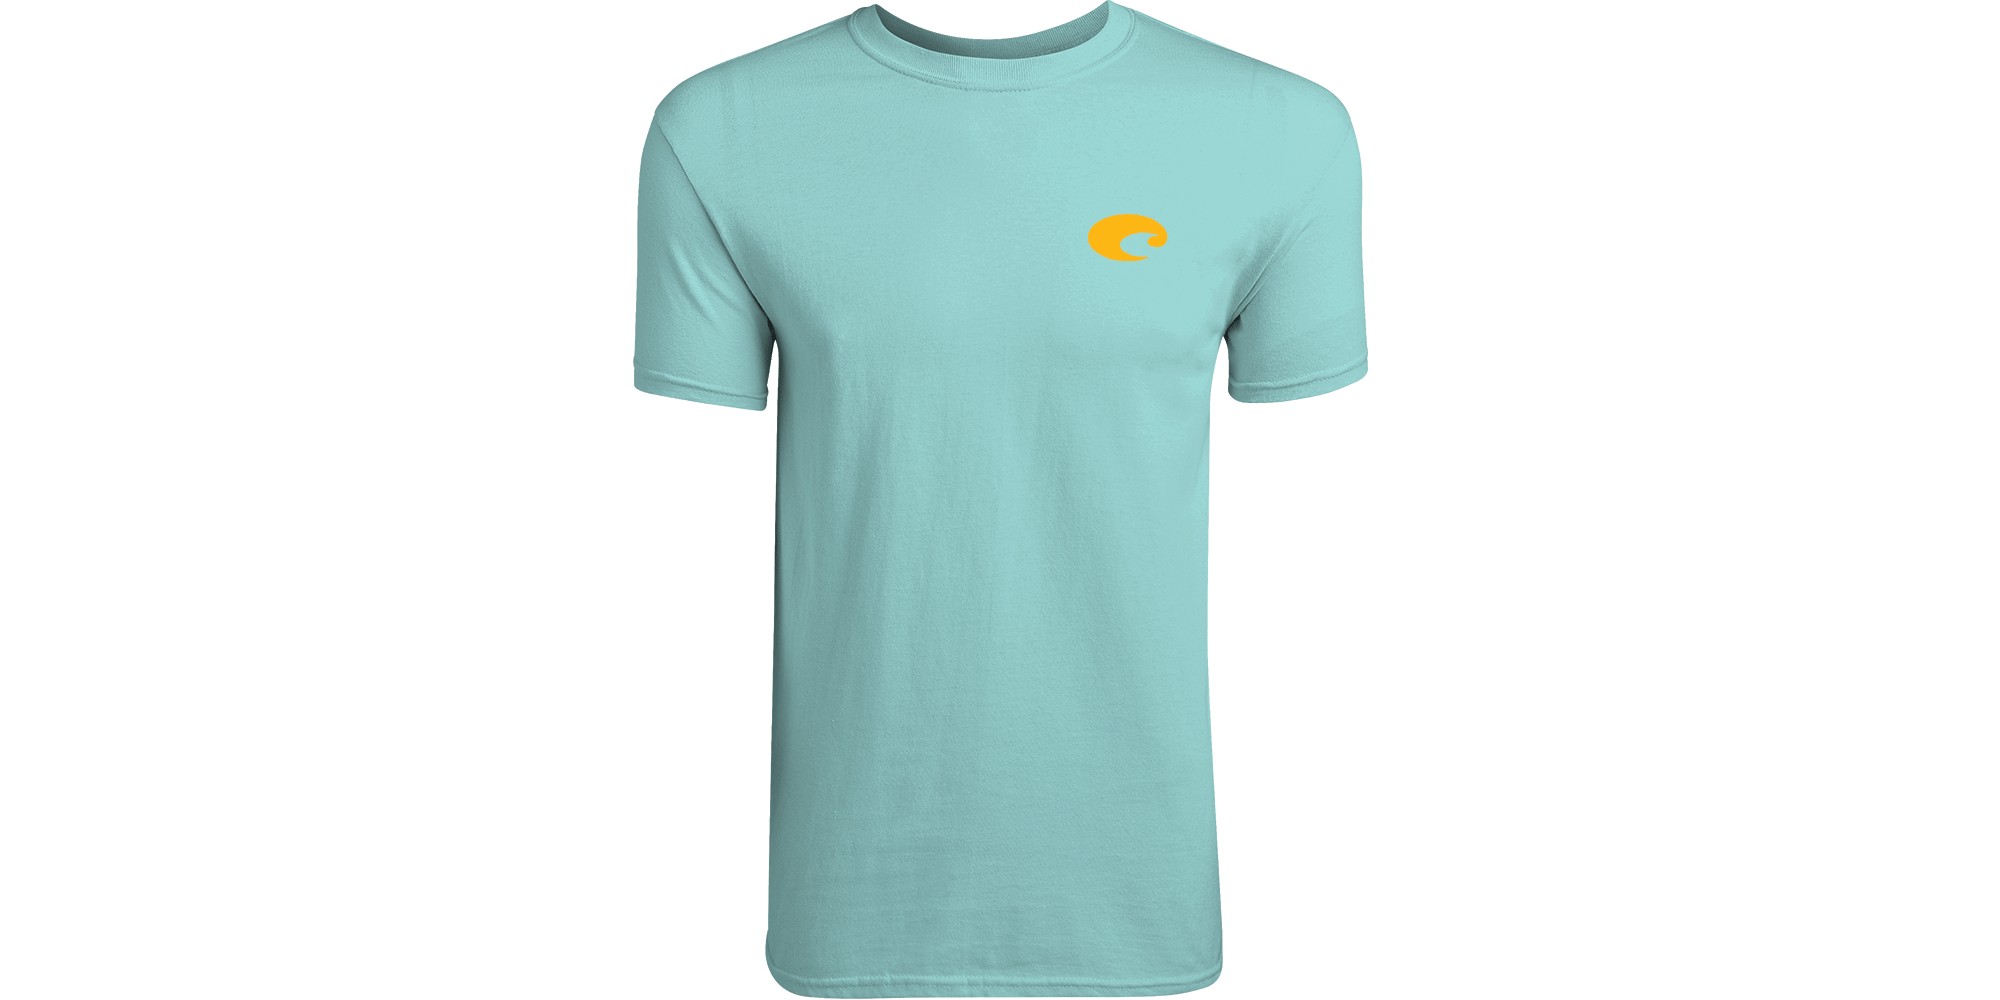 Details about   New Authentic Costa Short Sleeve T-Shirt World Sailfish  Small 